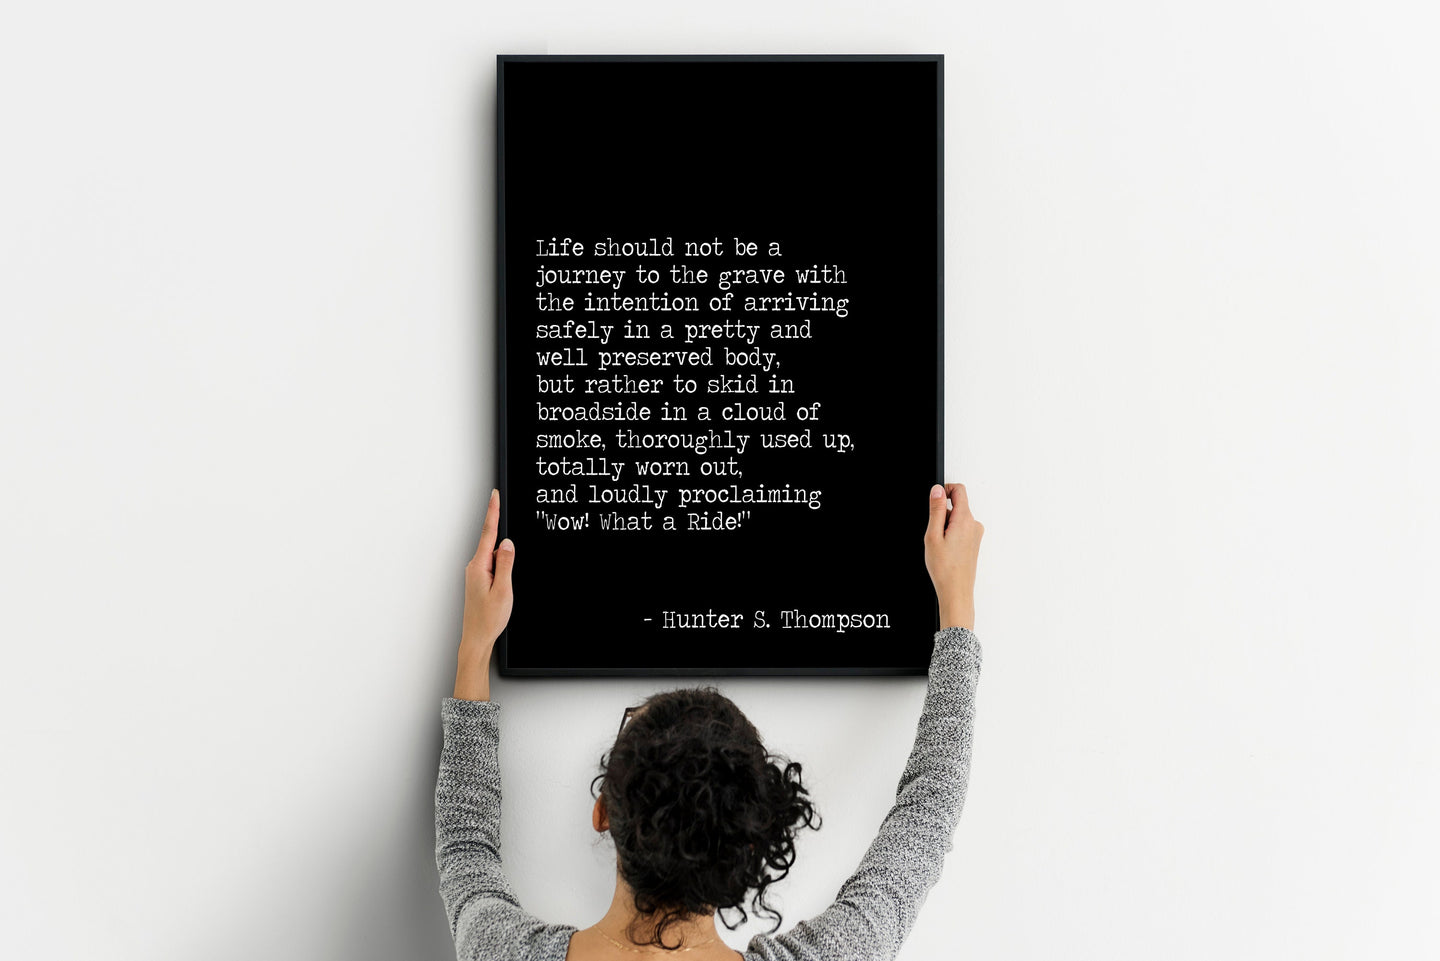 Hunter S Thompson - Life should not be a journey to the grave ... 